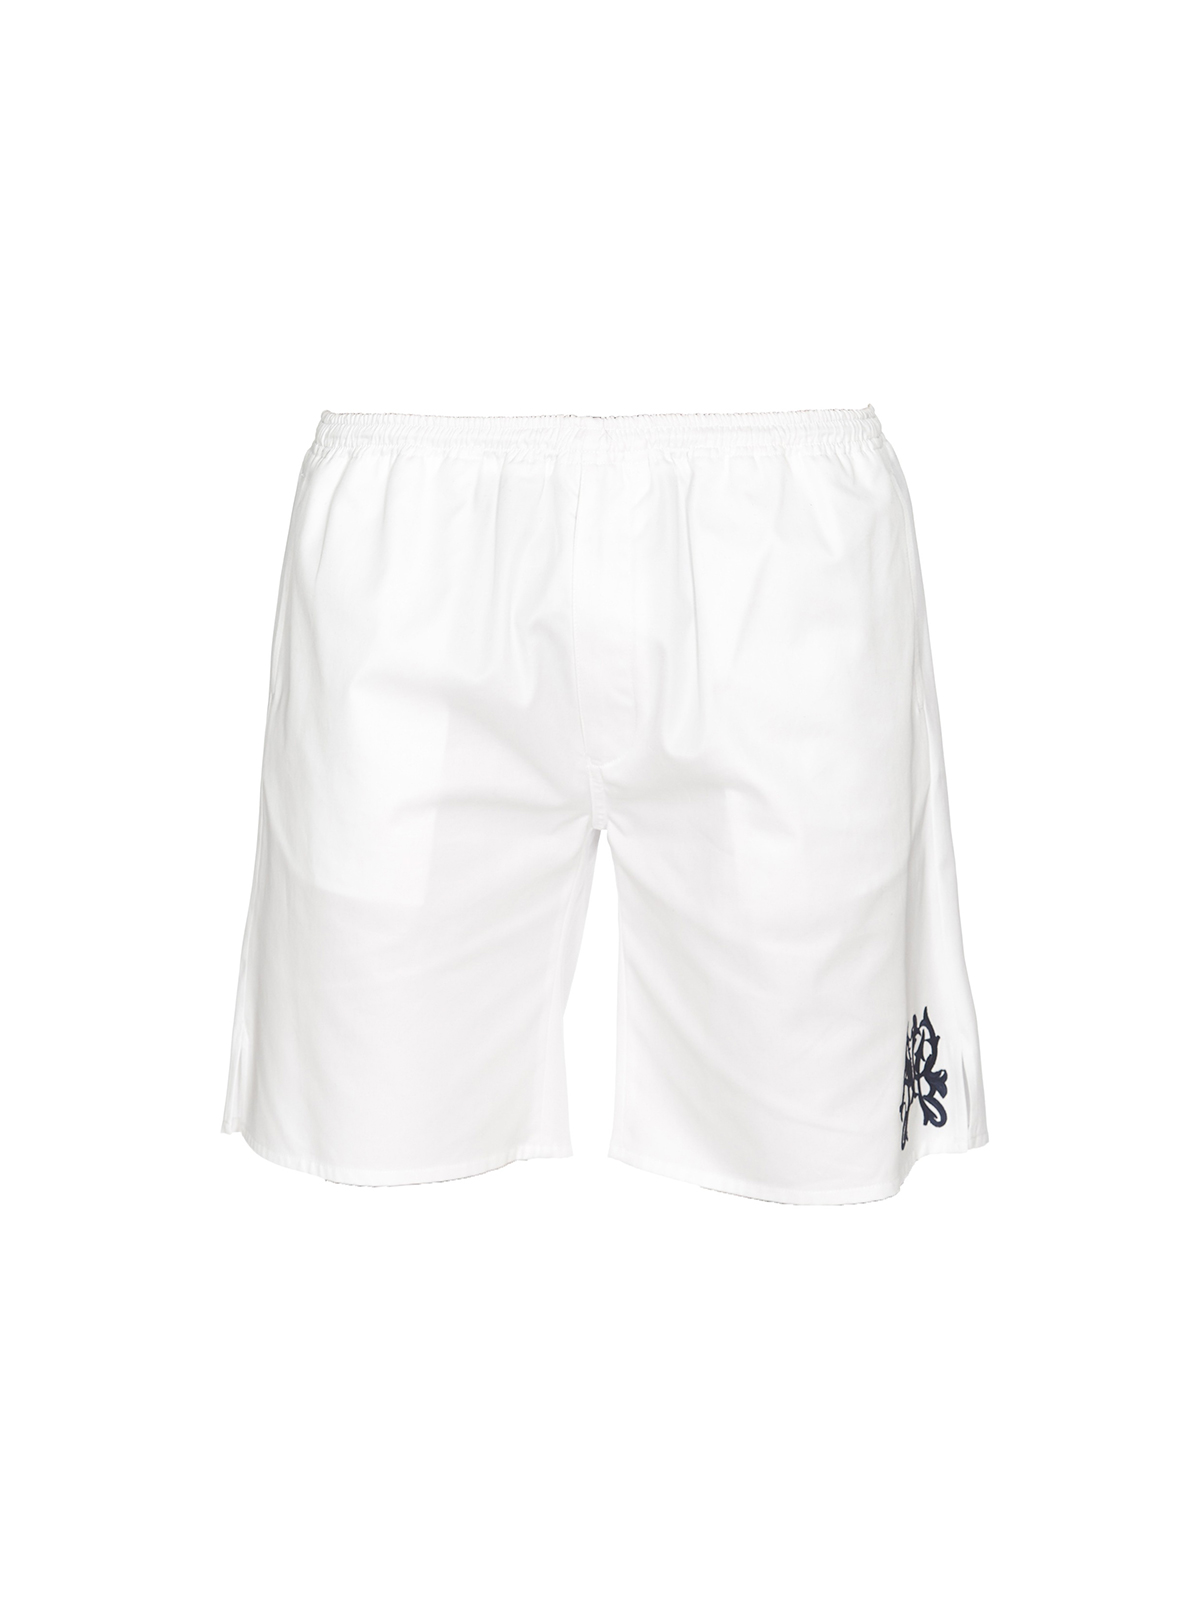 white embroidered shorts